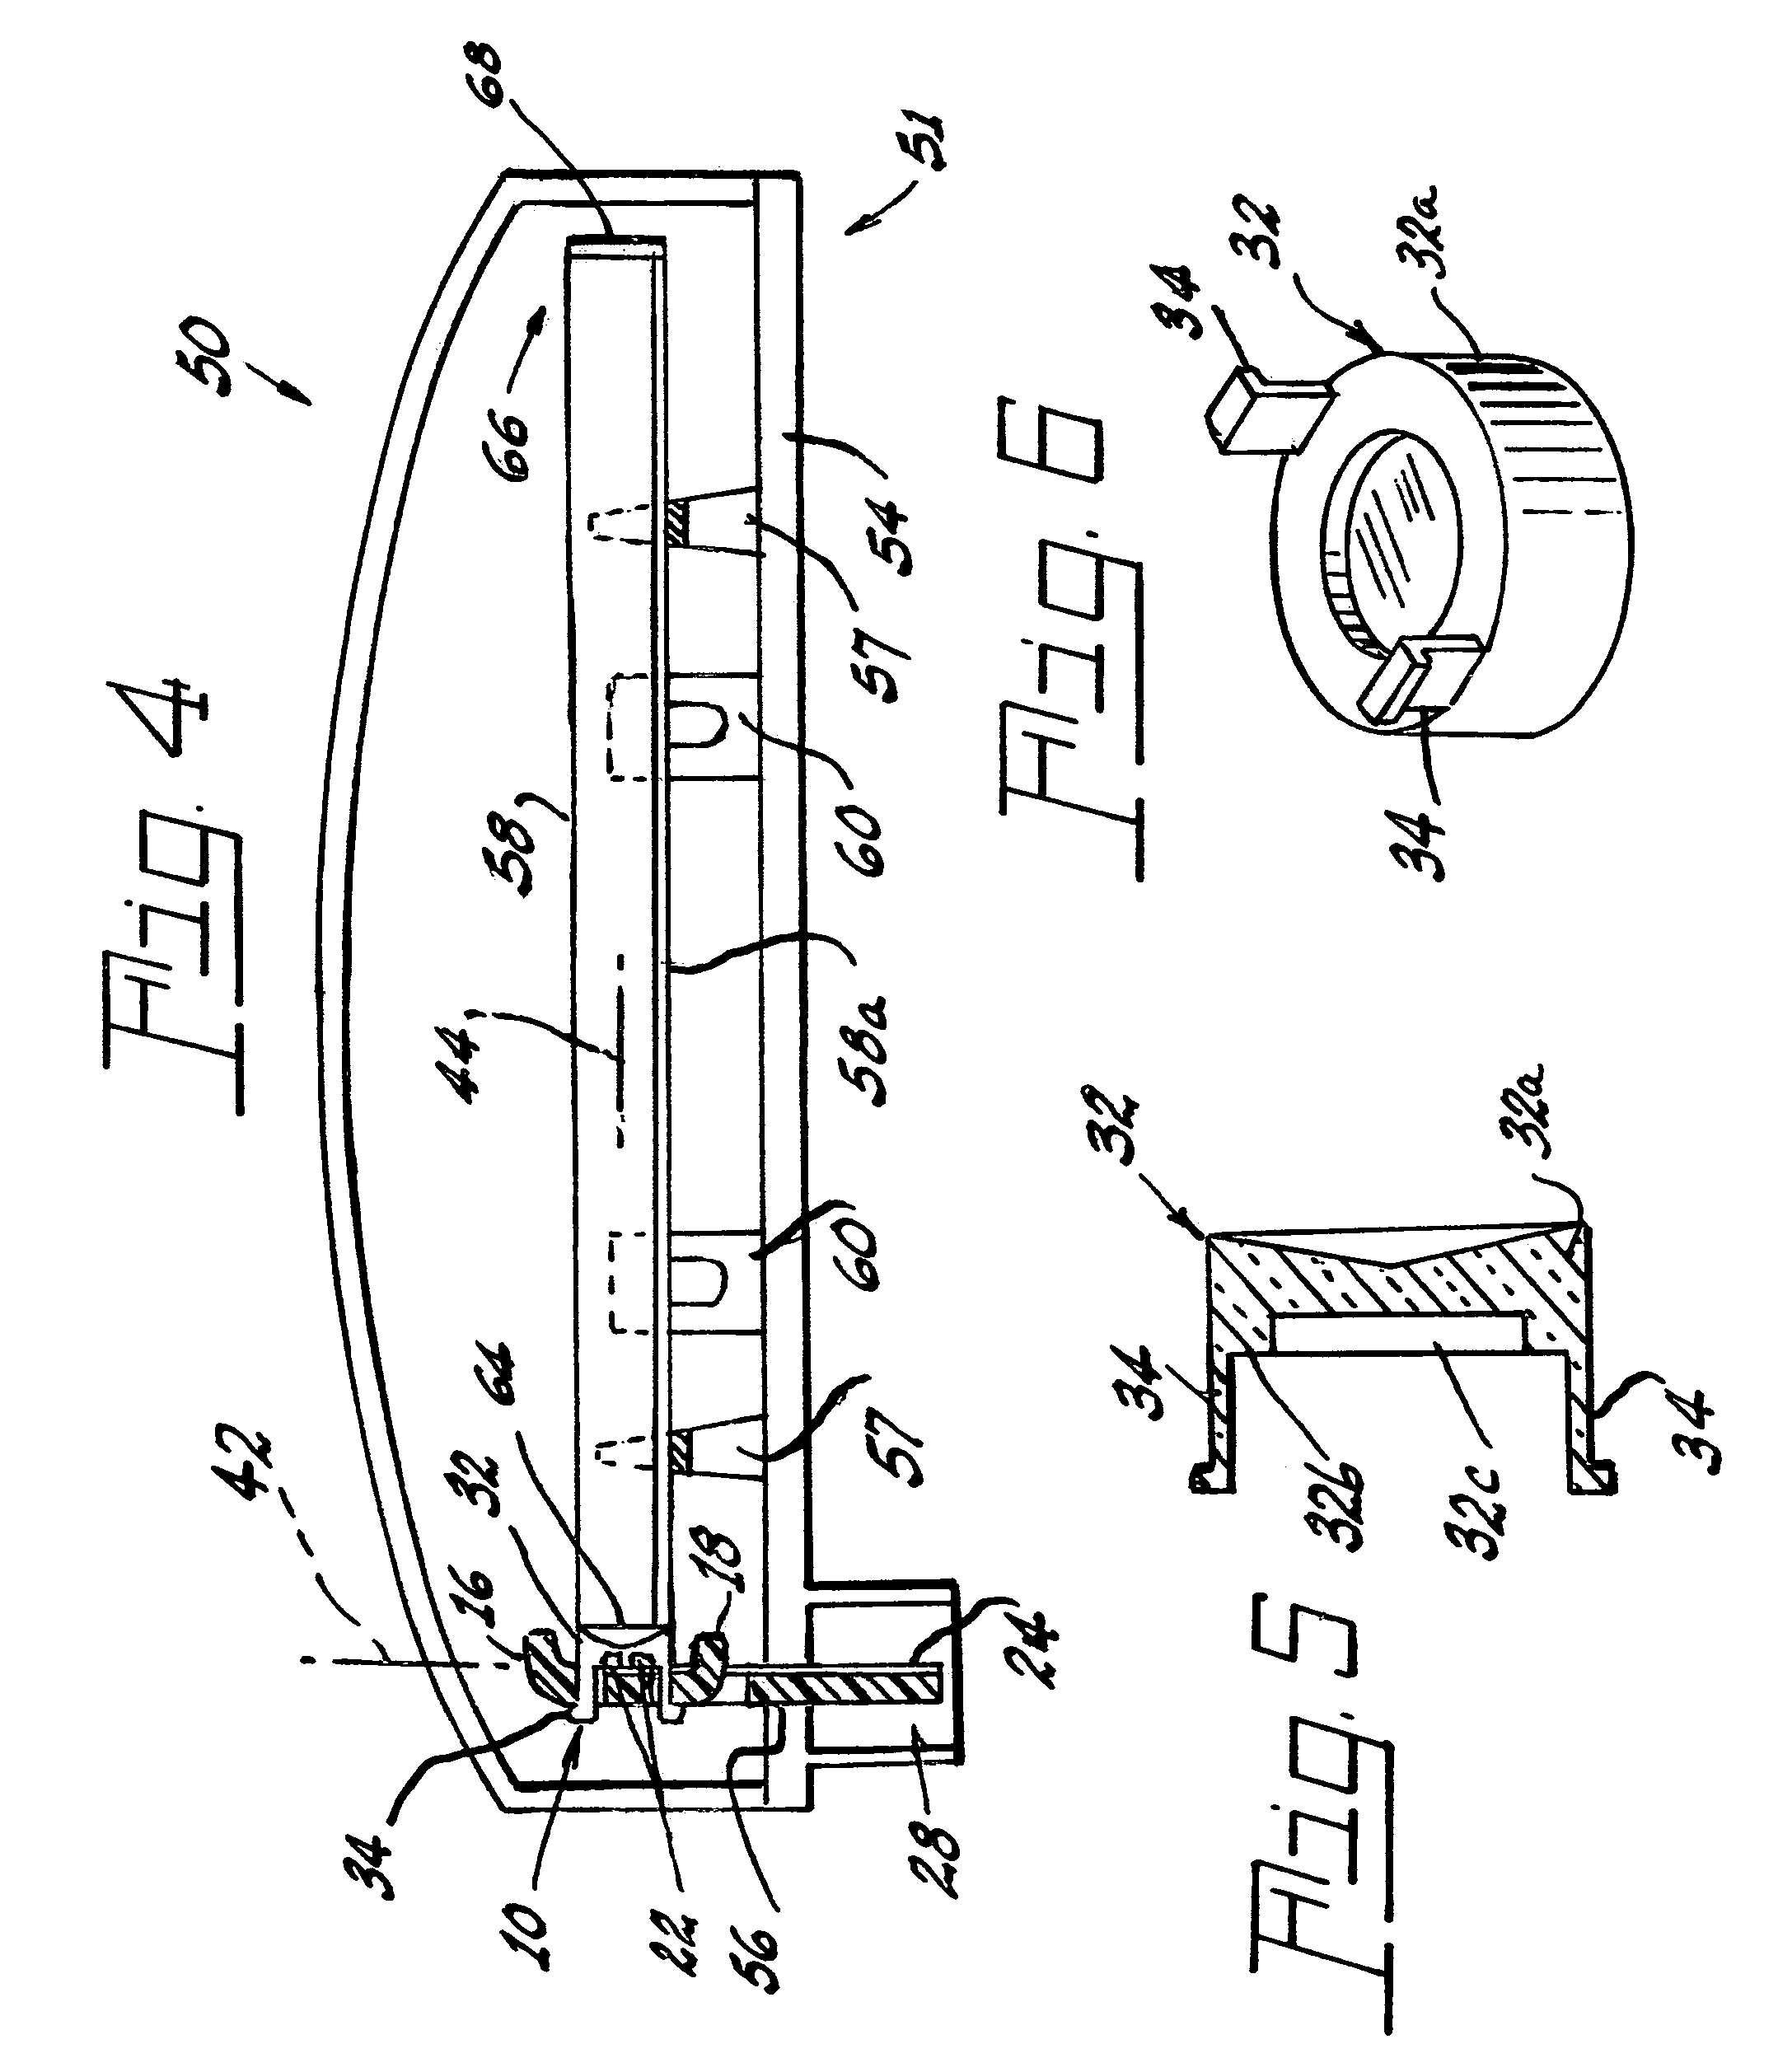 LED light source with integrated circuit and light guide